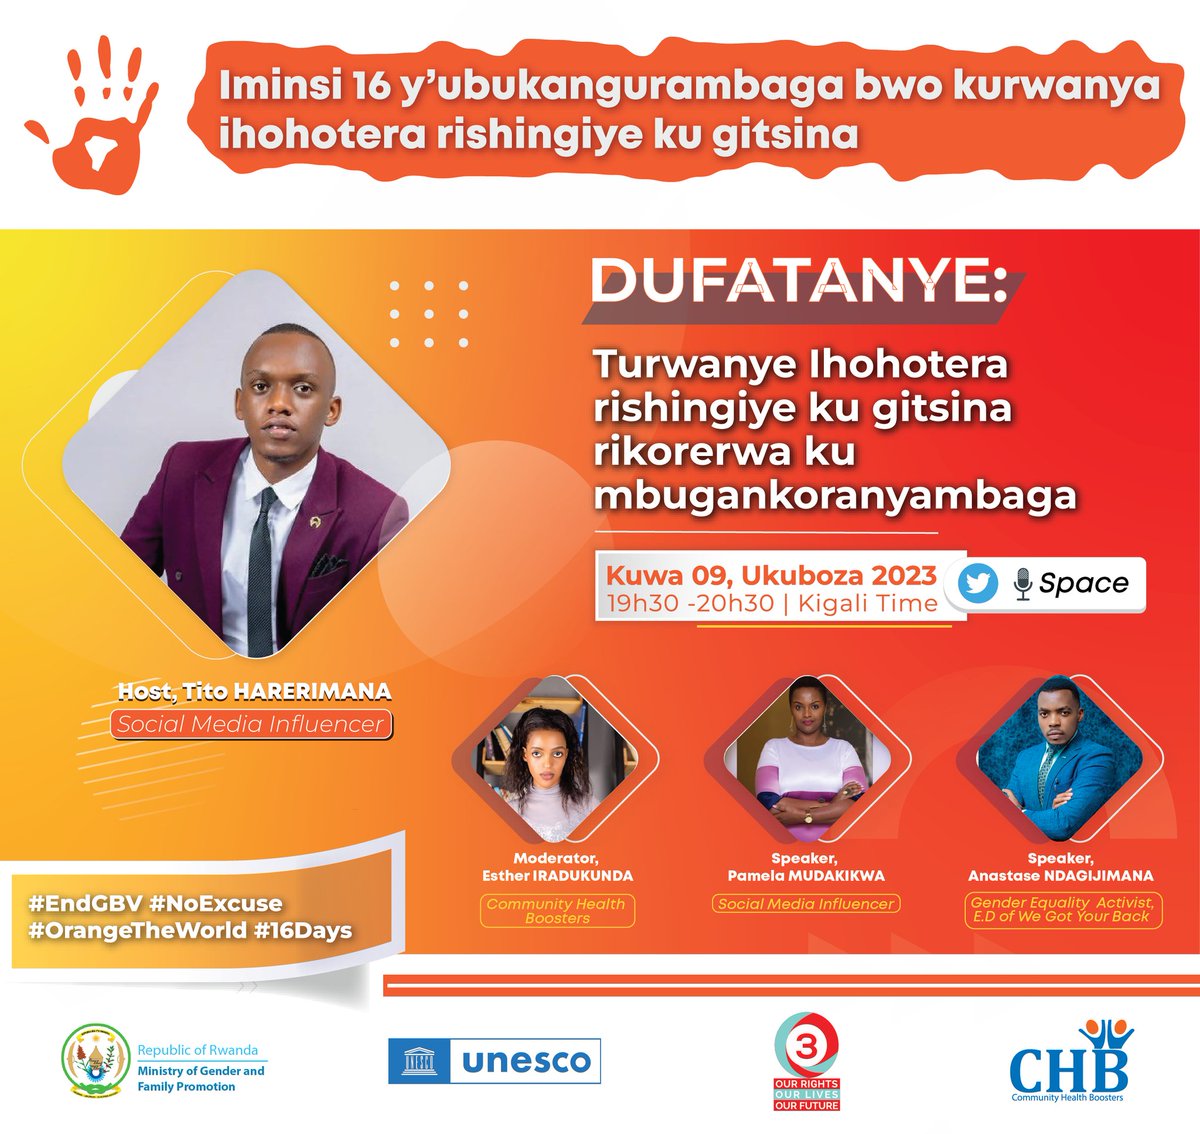 🧡 You can't afford to miss out on this inspiring X Space. 

UNITED! in a powerful conversation this evening at 7:30 PM - 8:30 PM Kigali time! 🕢 

DUFATANYE!😎🧡💪I will be there! 

#DigitalKindness #EndGBV #NoExcuse #OrangeTheWorld